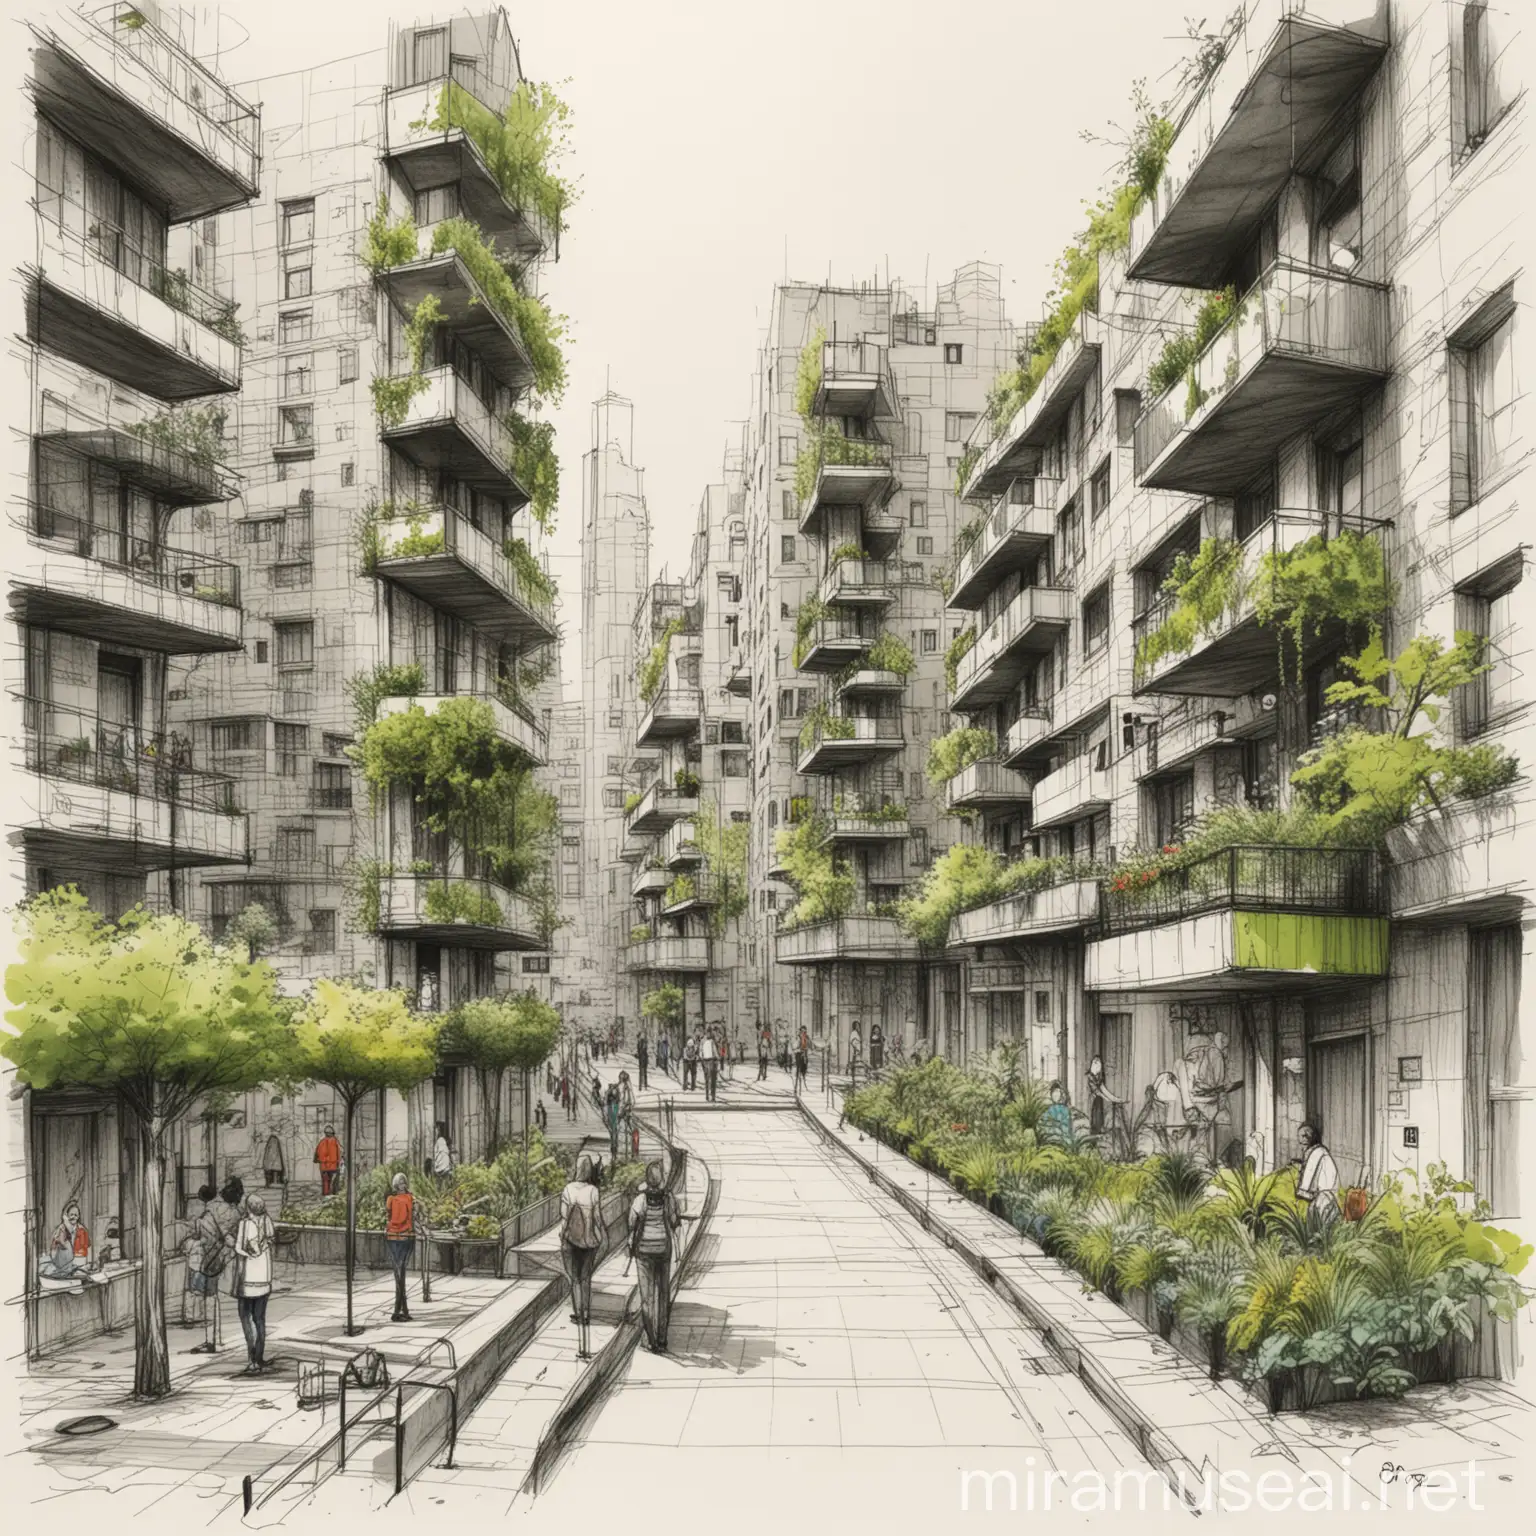 Innovative Built Environments Sketches for New Urbanism and Resilient Cities